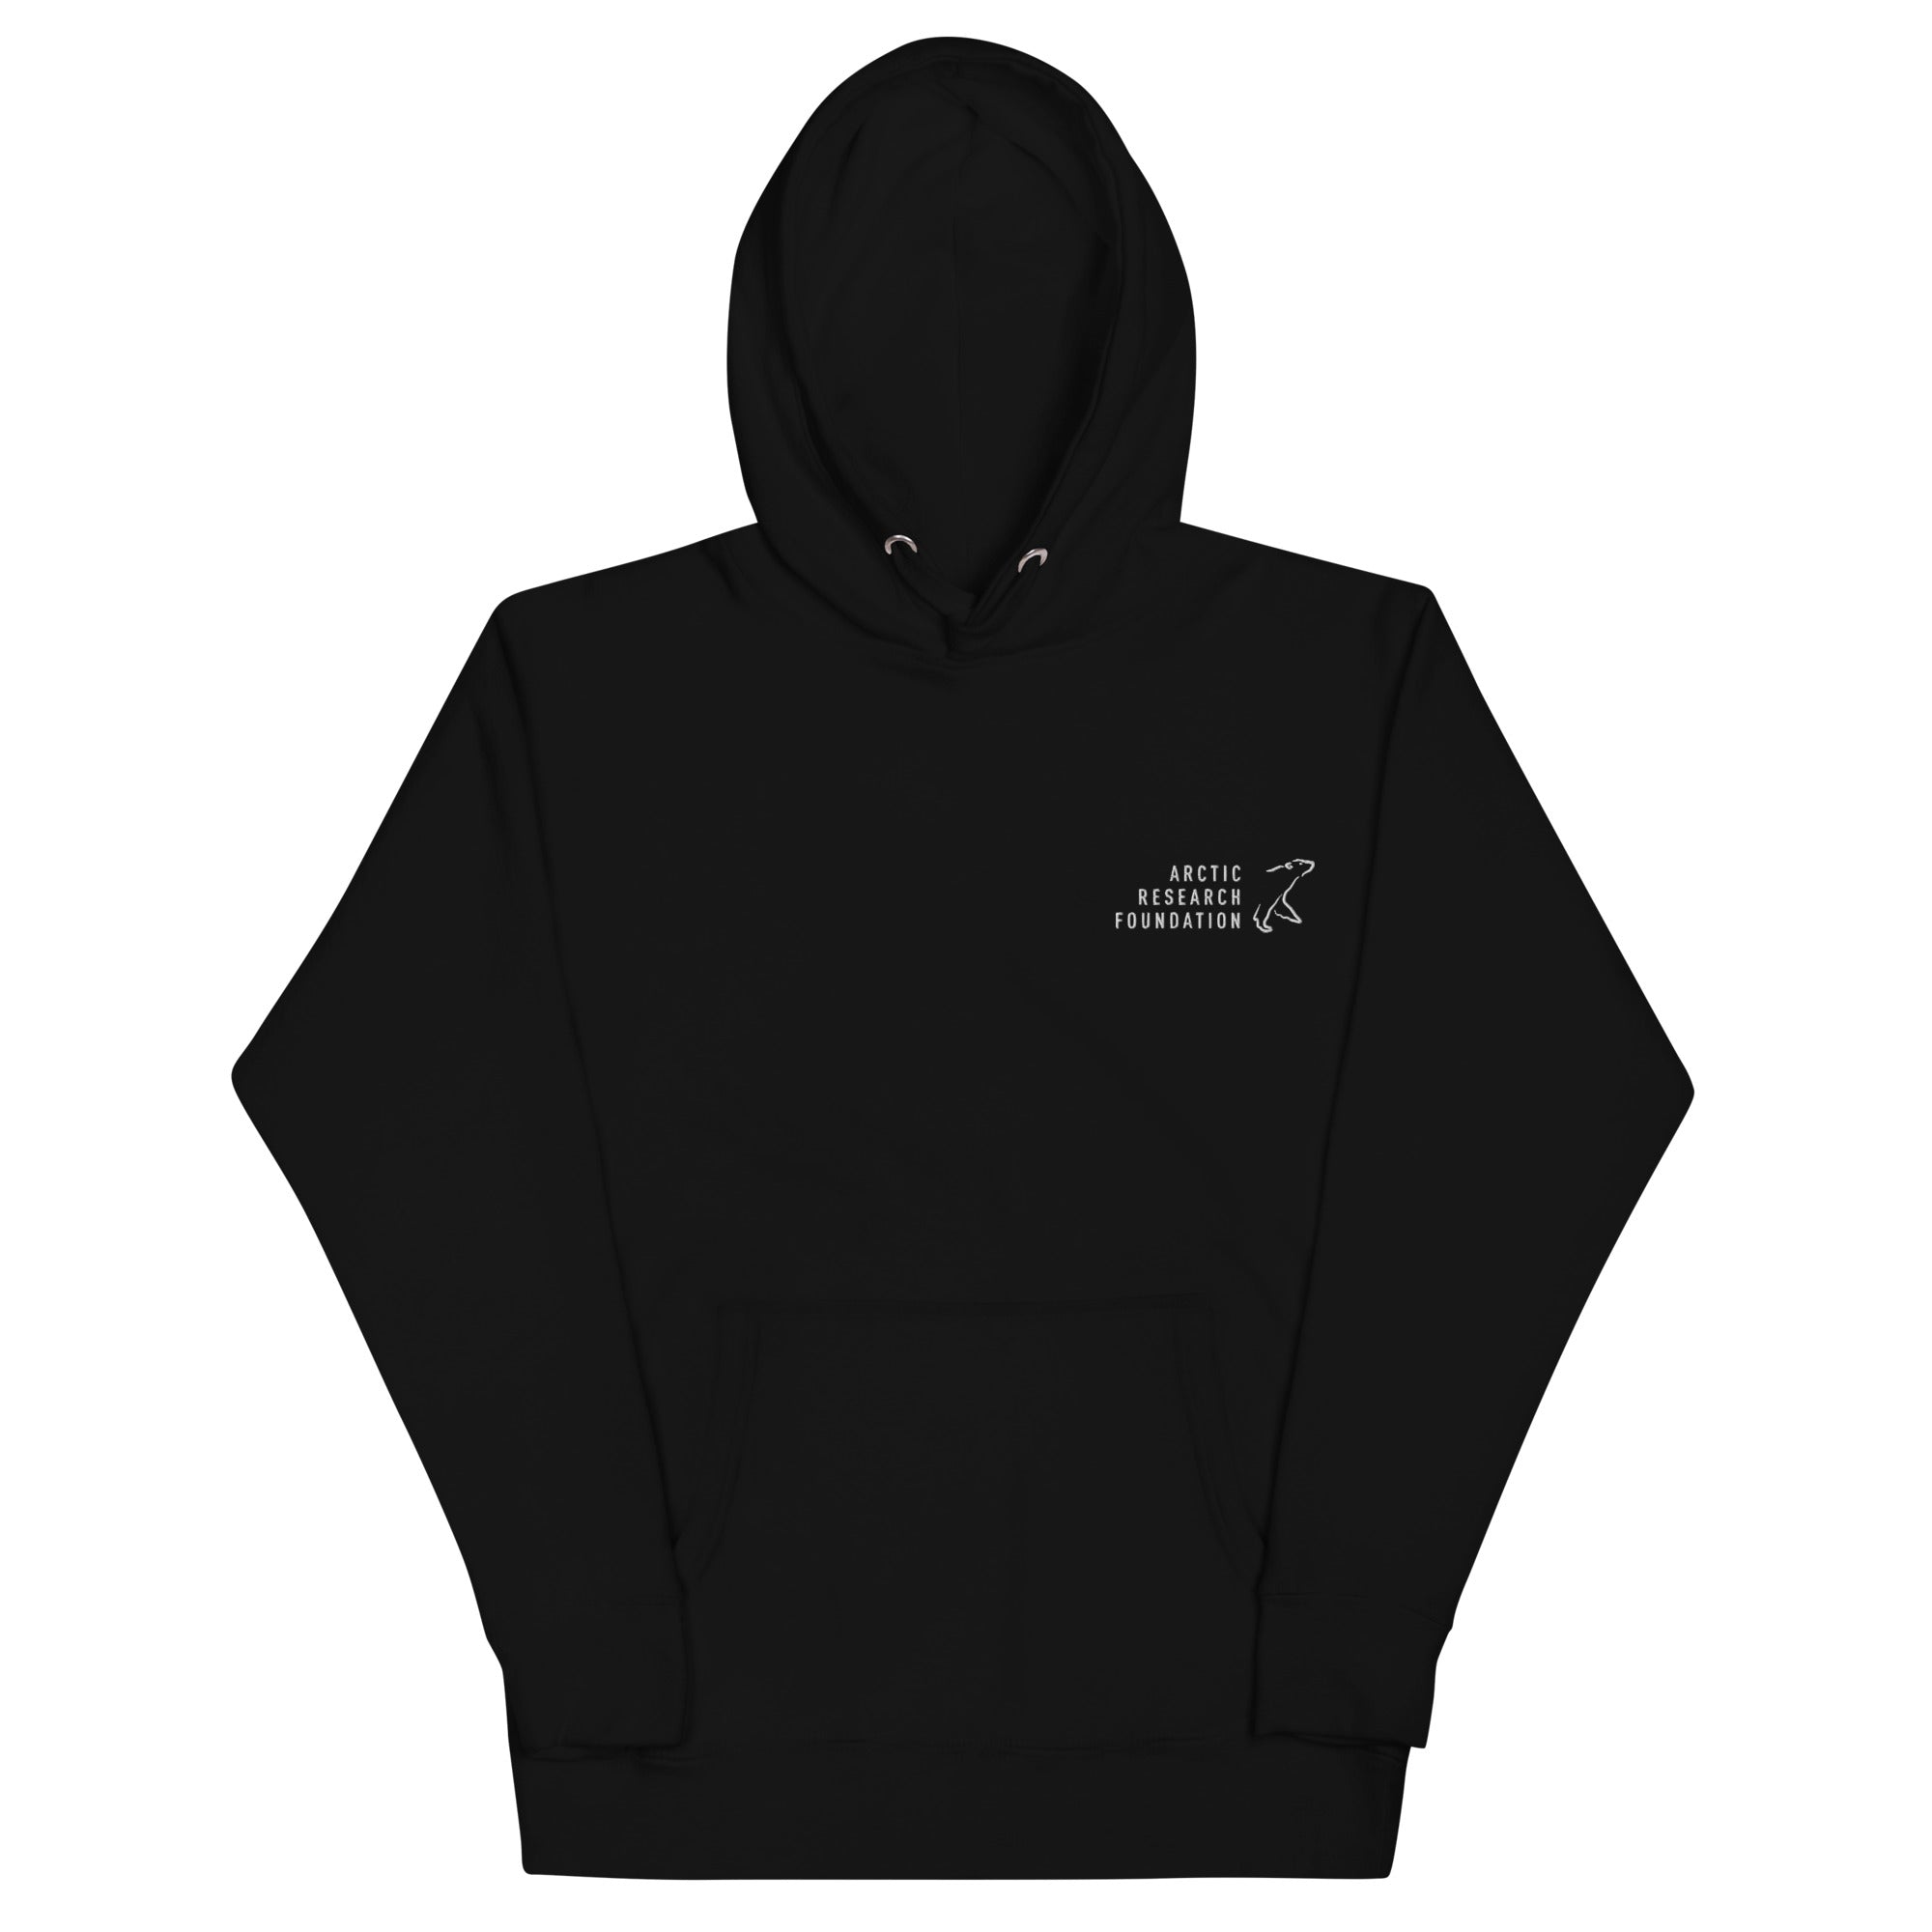 Arctic Research Foundation Hoodie